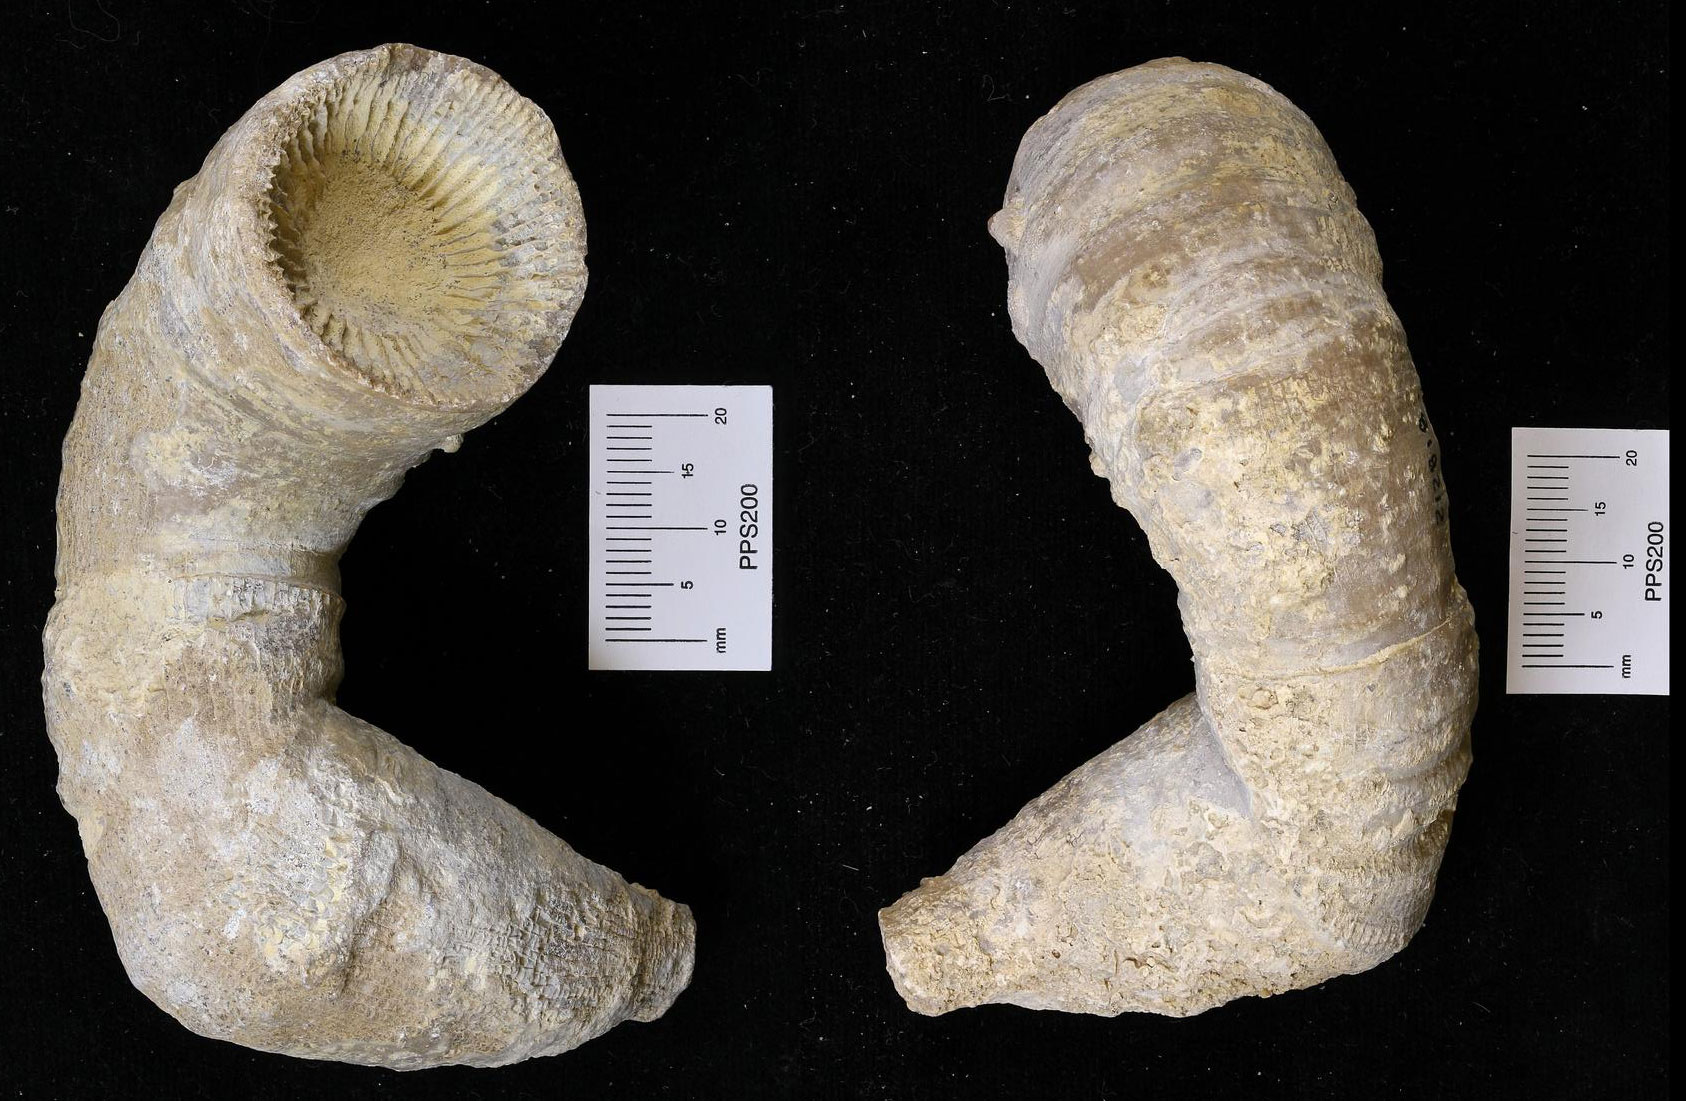 Photograph showing two views of a rugose coral or horn coral from the Pennsylvanian of eastern Nebraska. The photo shows a columnar specimen that is truncated at the top and tapers at the bottom, with a nearly 90-degree bend about 1/3 of the way from the bottom. In the left view, the septa inside the top of the coral can be seen.